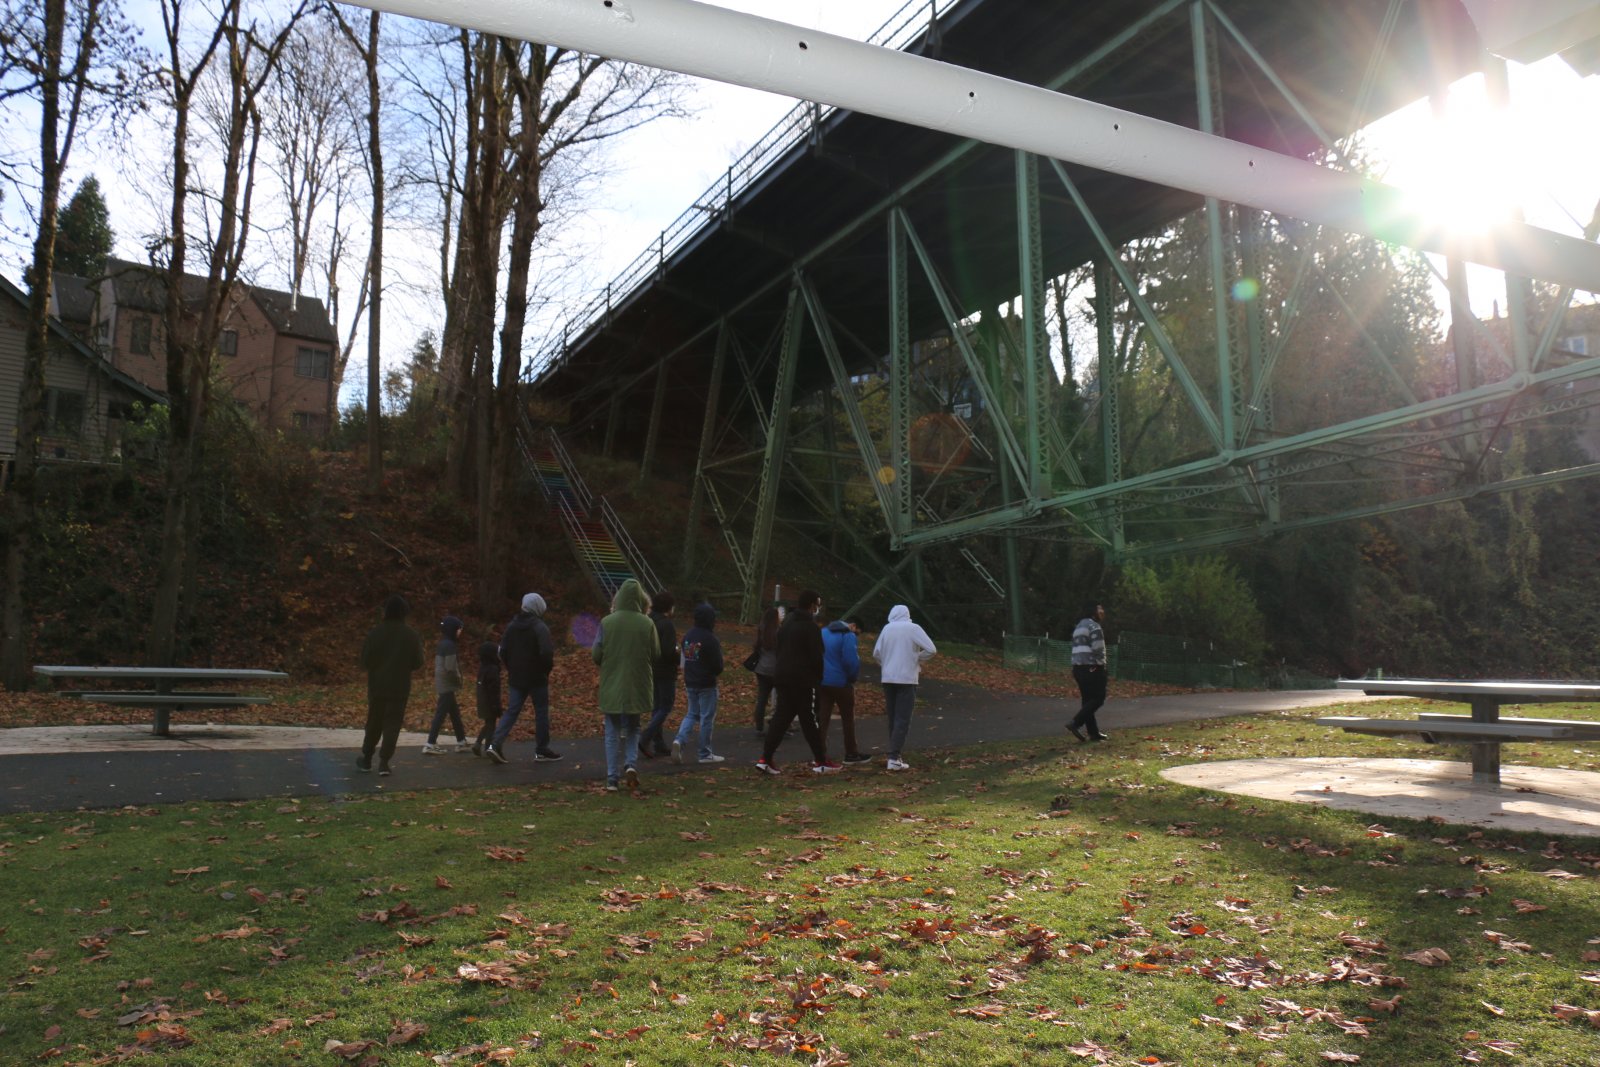 Students in a STEAM Career Tracks Saturday workshop, walking under a bridge in a nature park